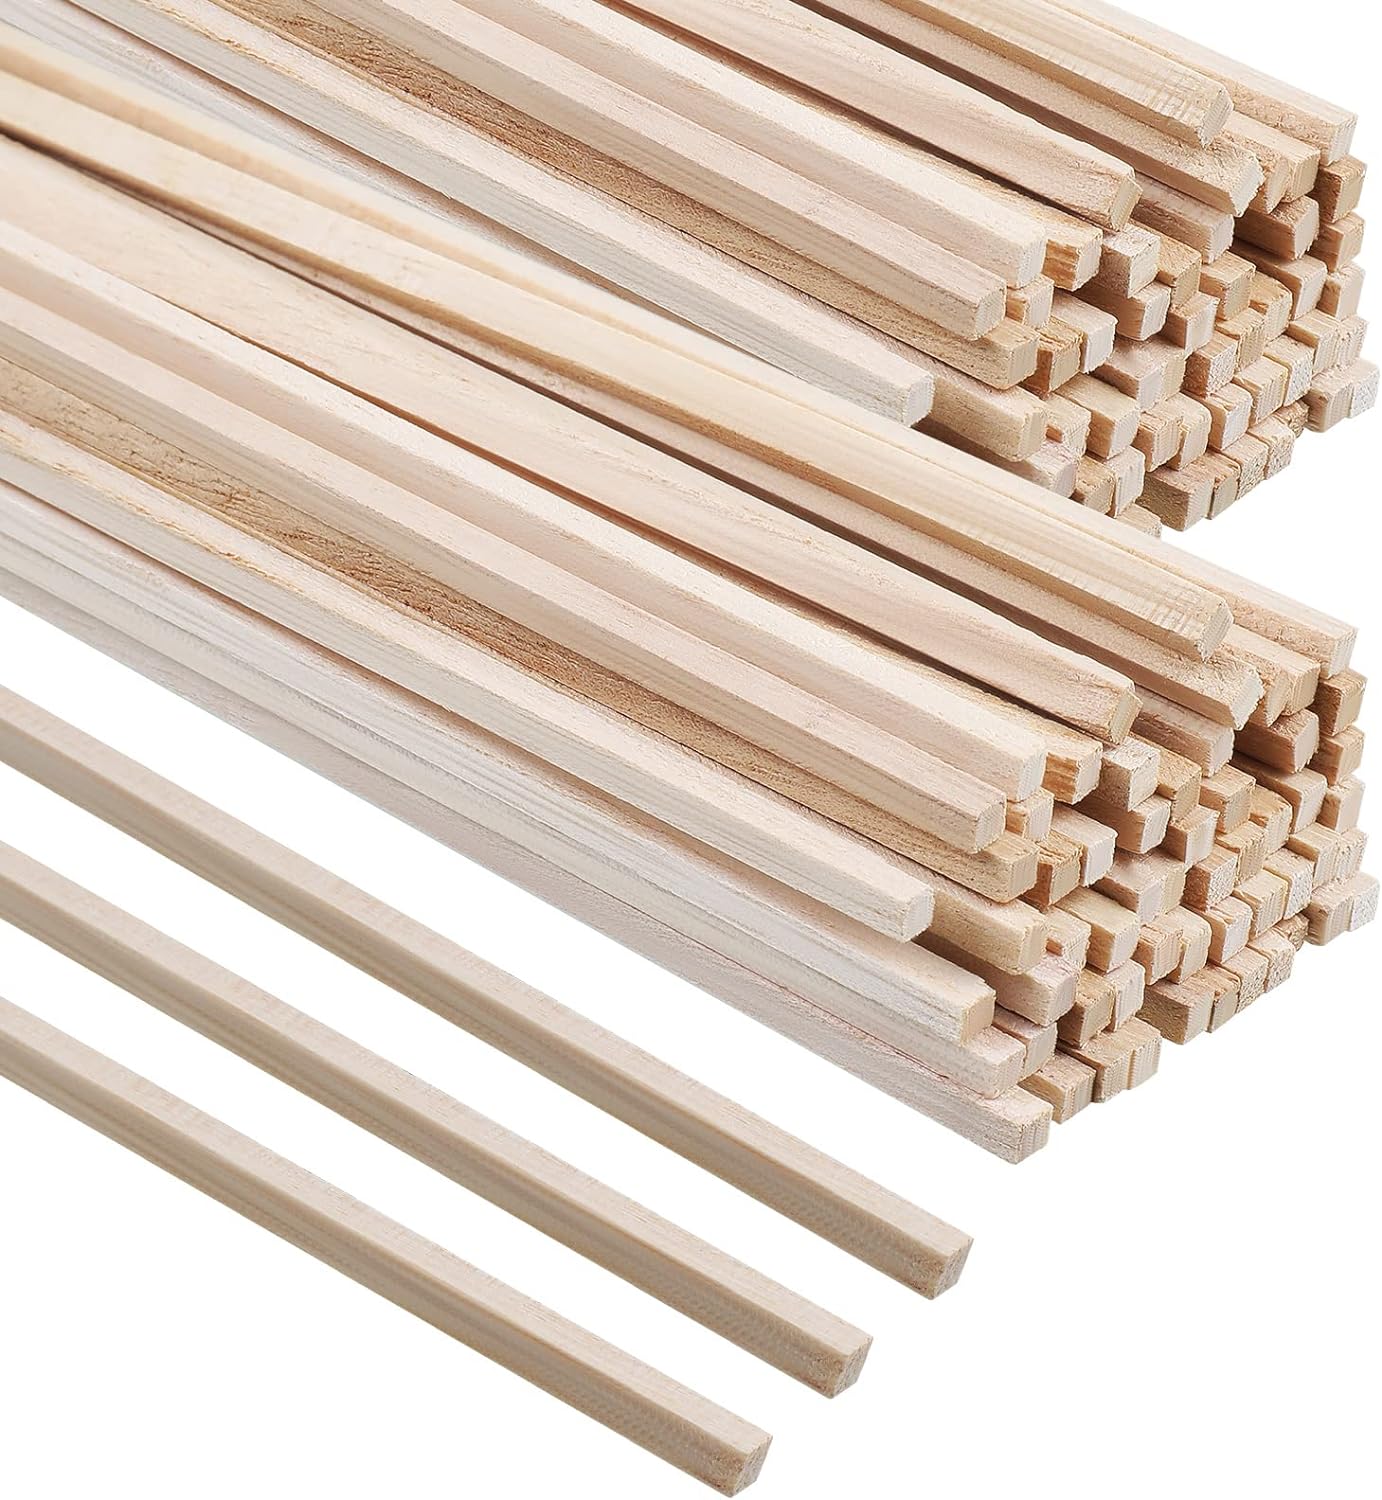 Looking to Buy The Best Balsa Wood. : Discover The Top 10 Midwest Products That Craft Lovers Adore